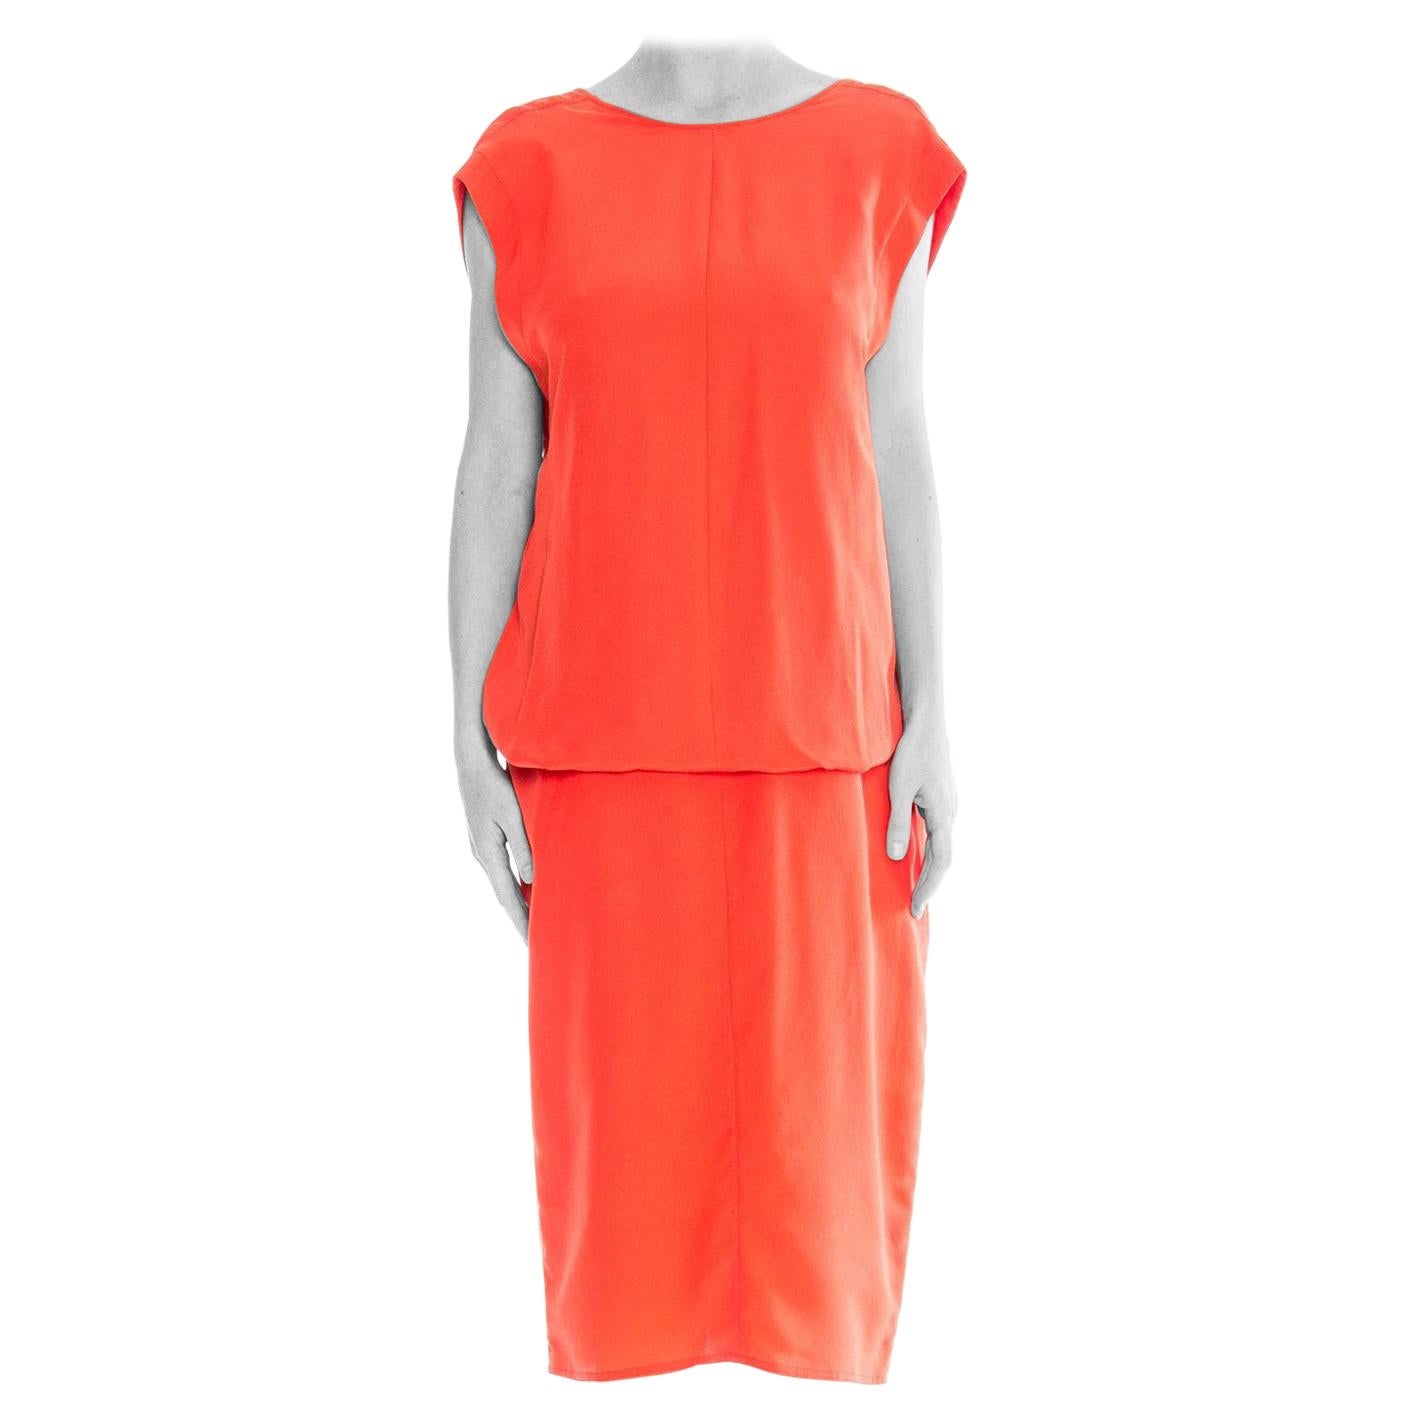 1980 GIANFRANCO FERRE Coral Light Weight Silk Low Back Minimalist Dress For Sale